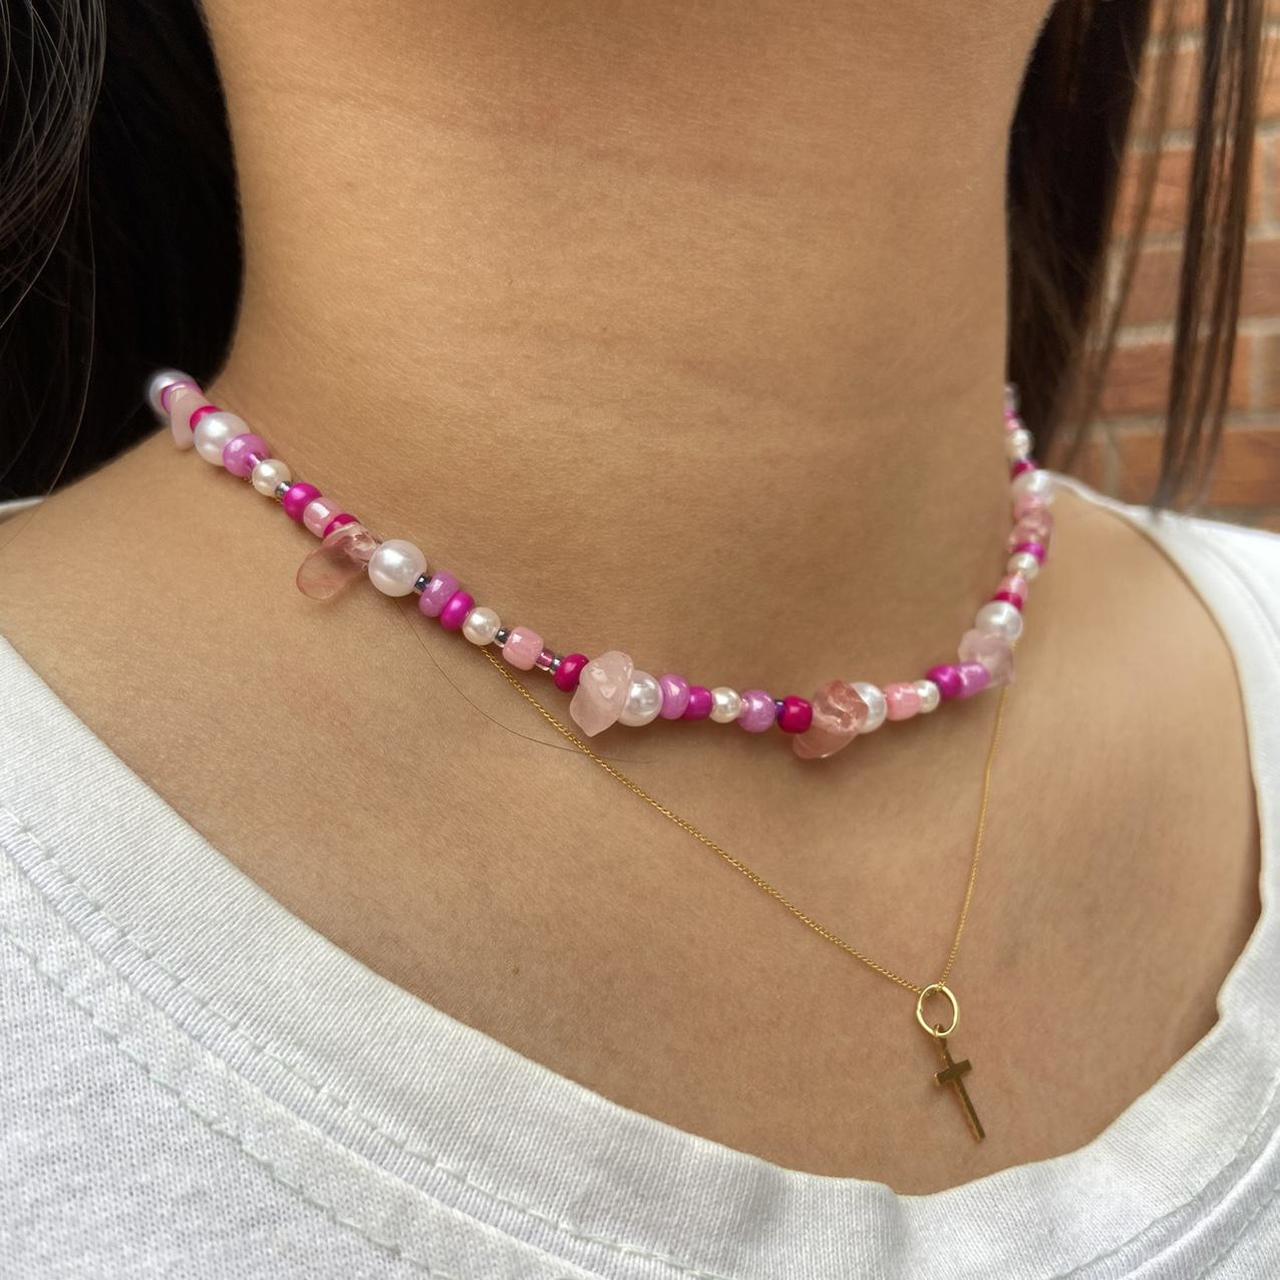 Product Image 2 - handmade beaded pink-combi necklace 💖

gem-stoned